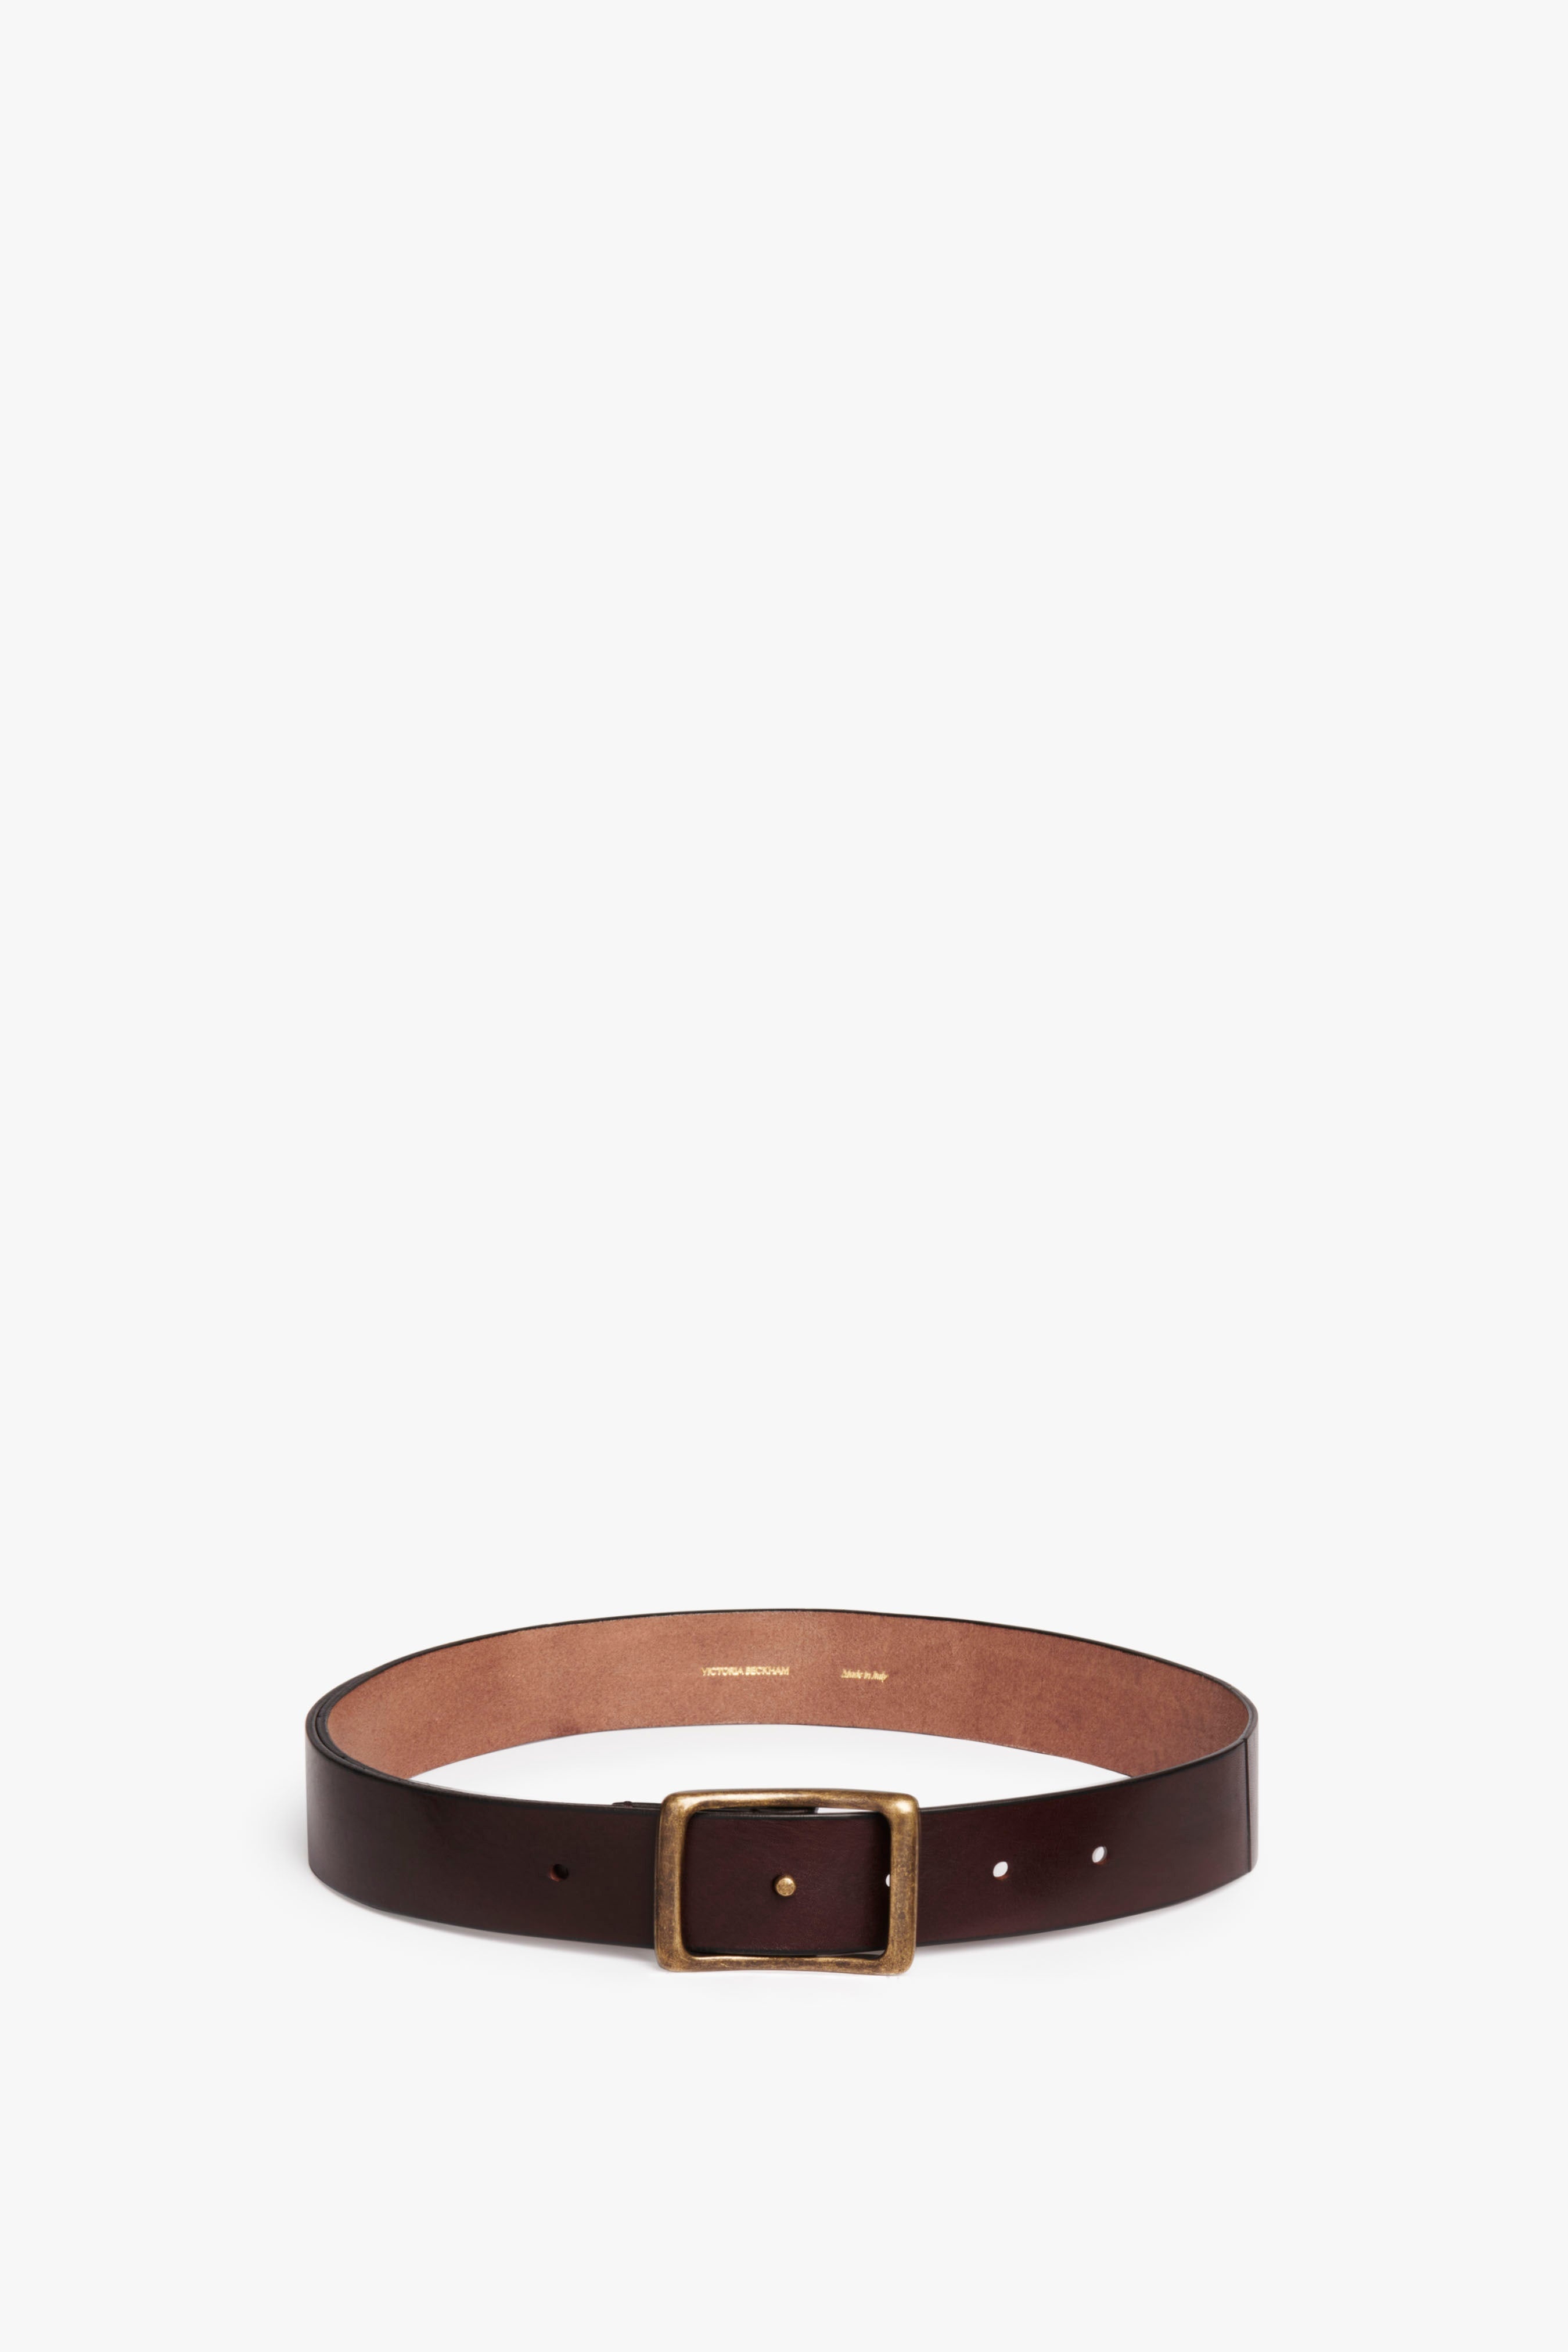 Utility Belt in Chocolate Brown - 2